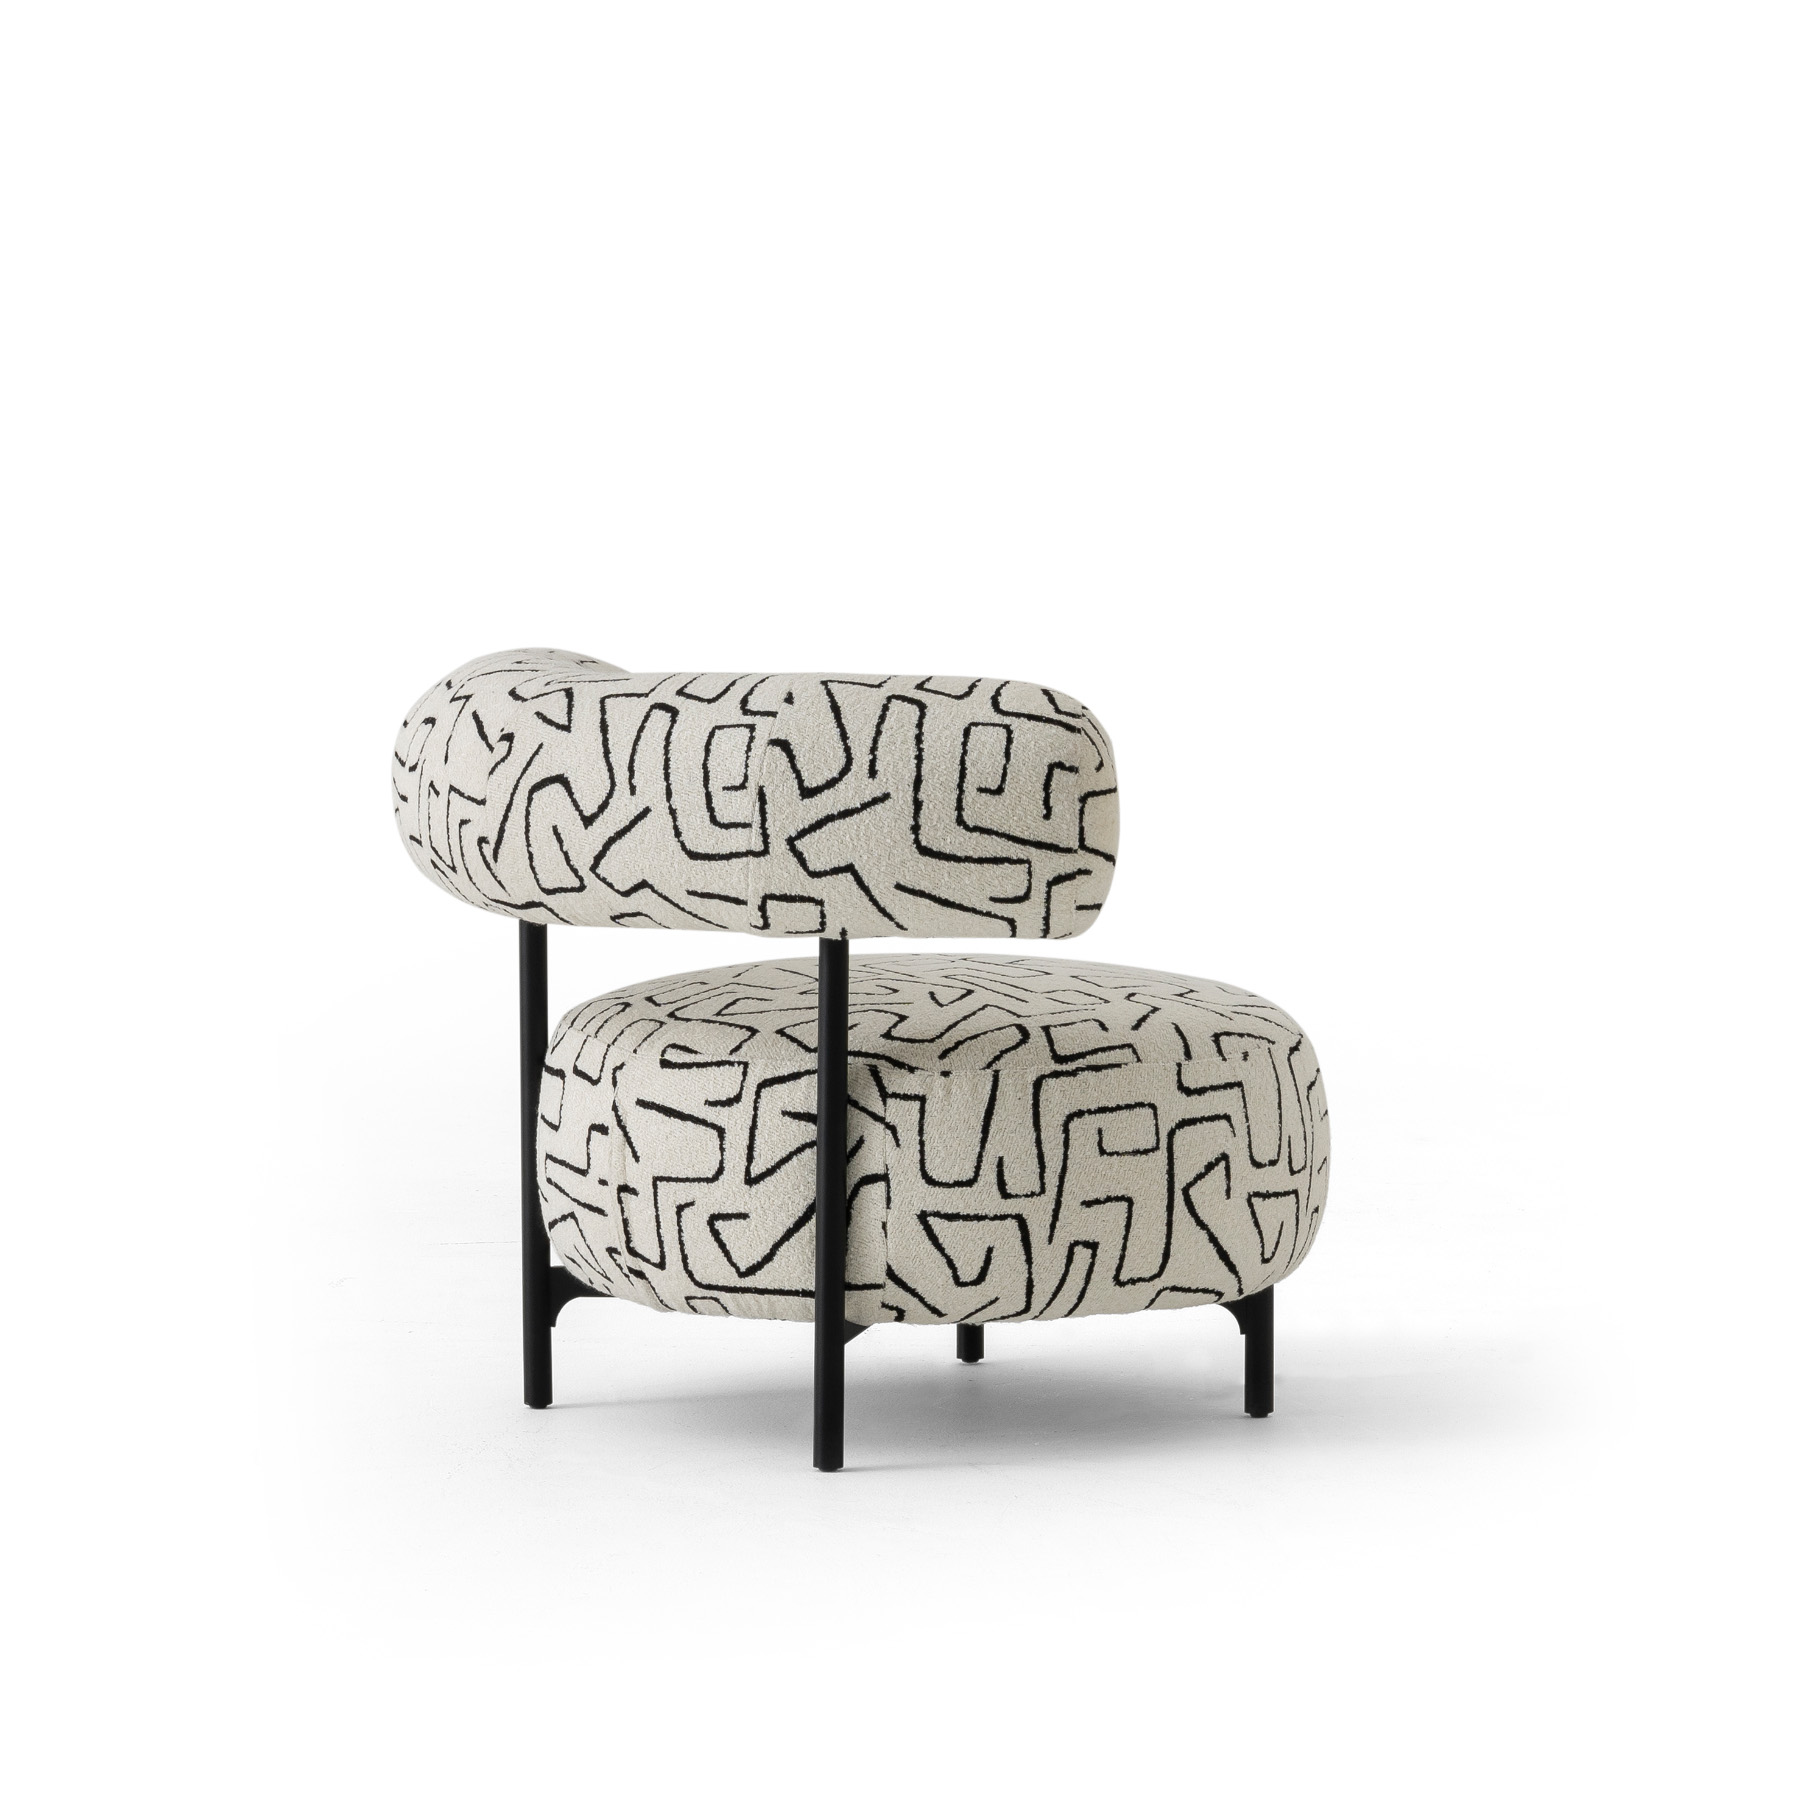 bon bon round armchair accent chair unique modern design cute in patterned white fabric rear view